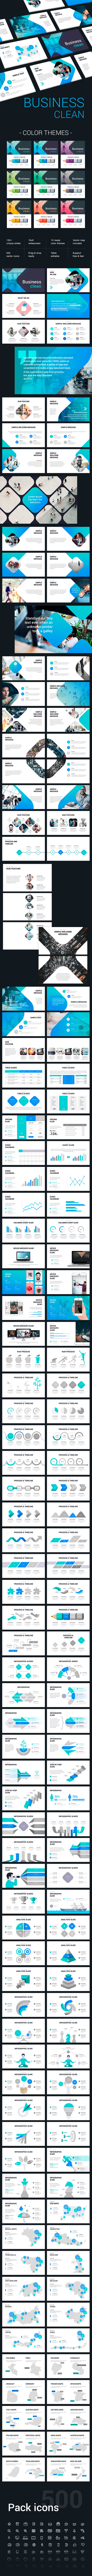 Business Clean Presentation Template